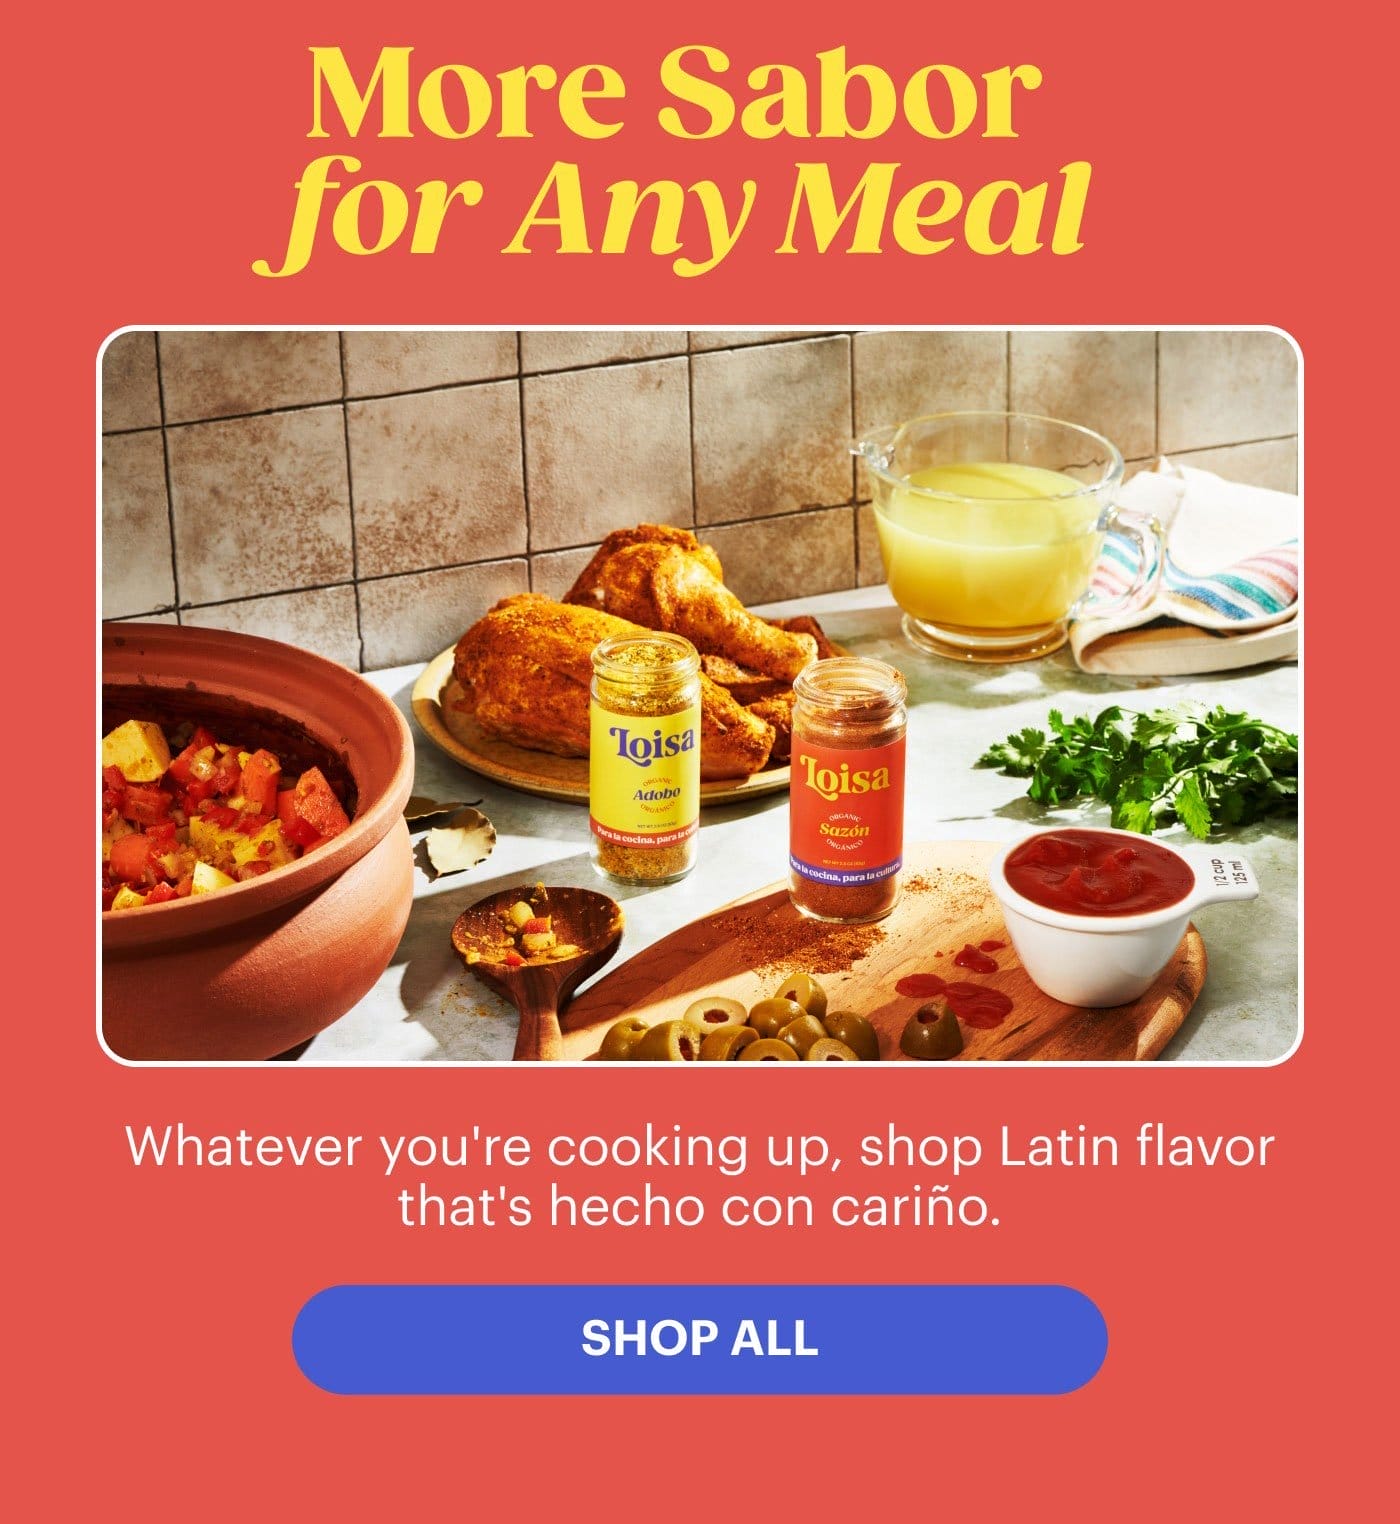 More Sabor for Any Meal - Shop All